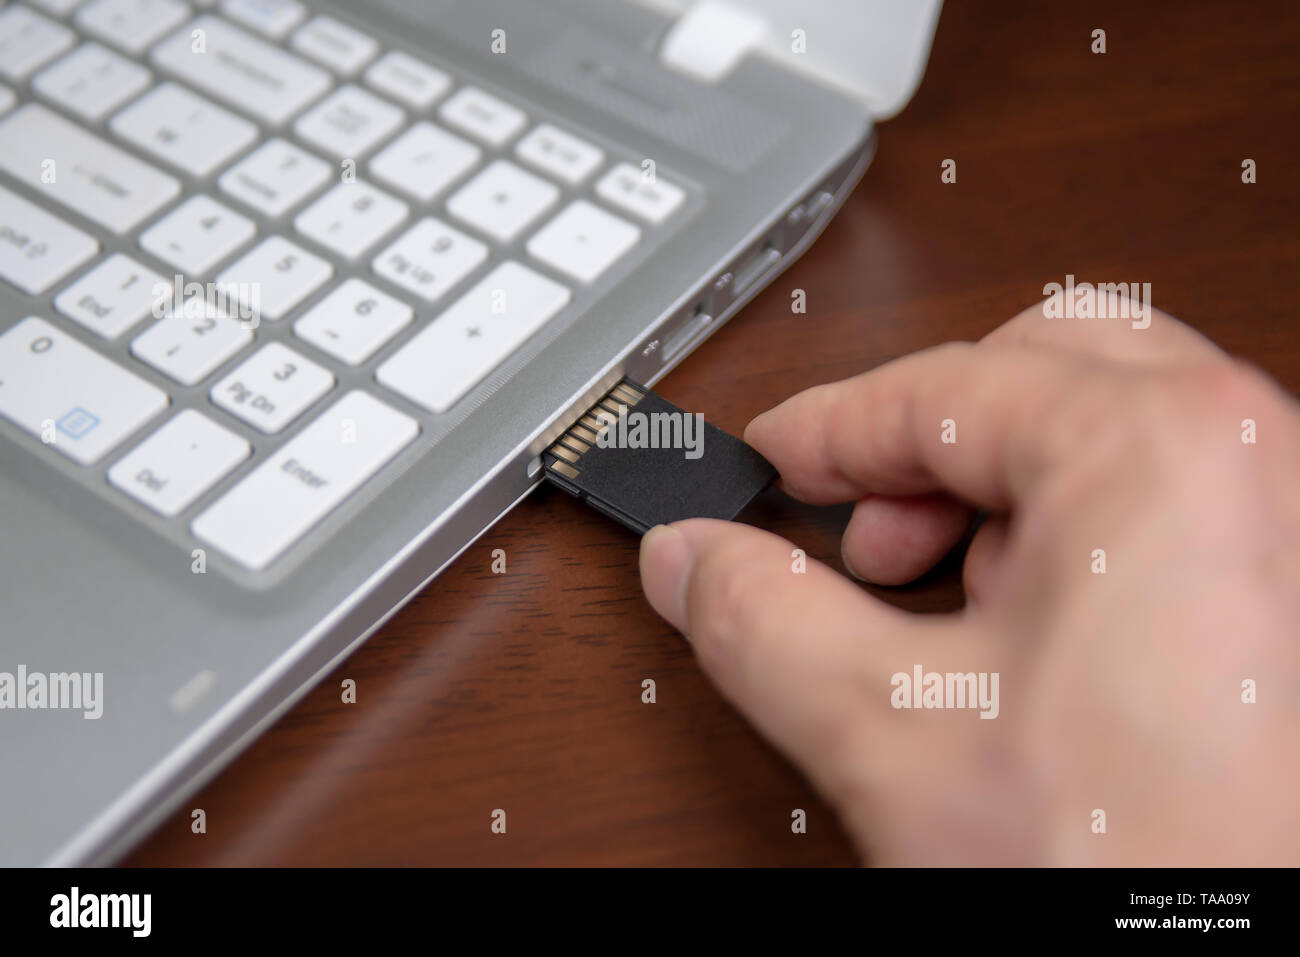 Human hand plugging in an SD media card into the personal laptop computer Stock Photo